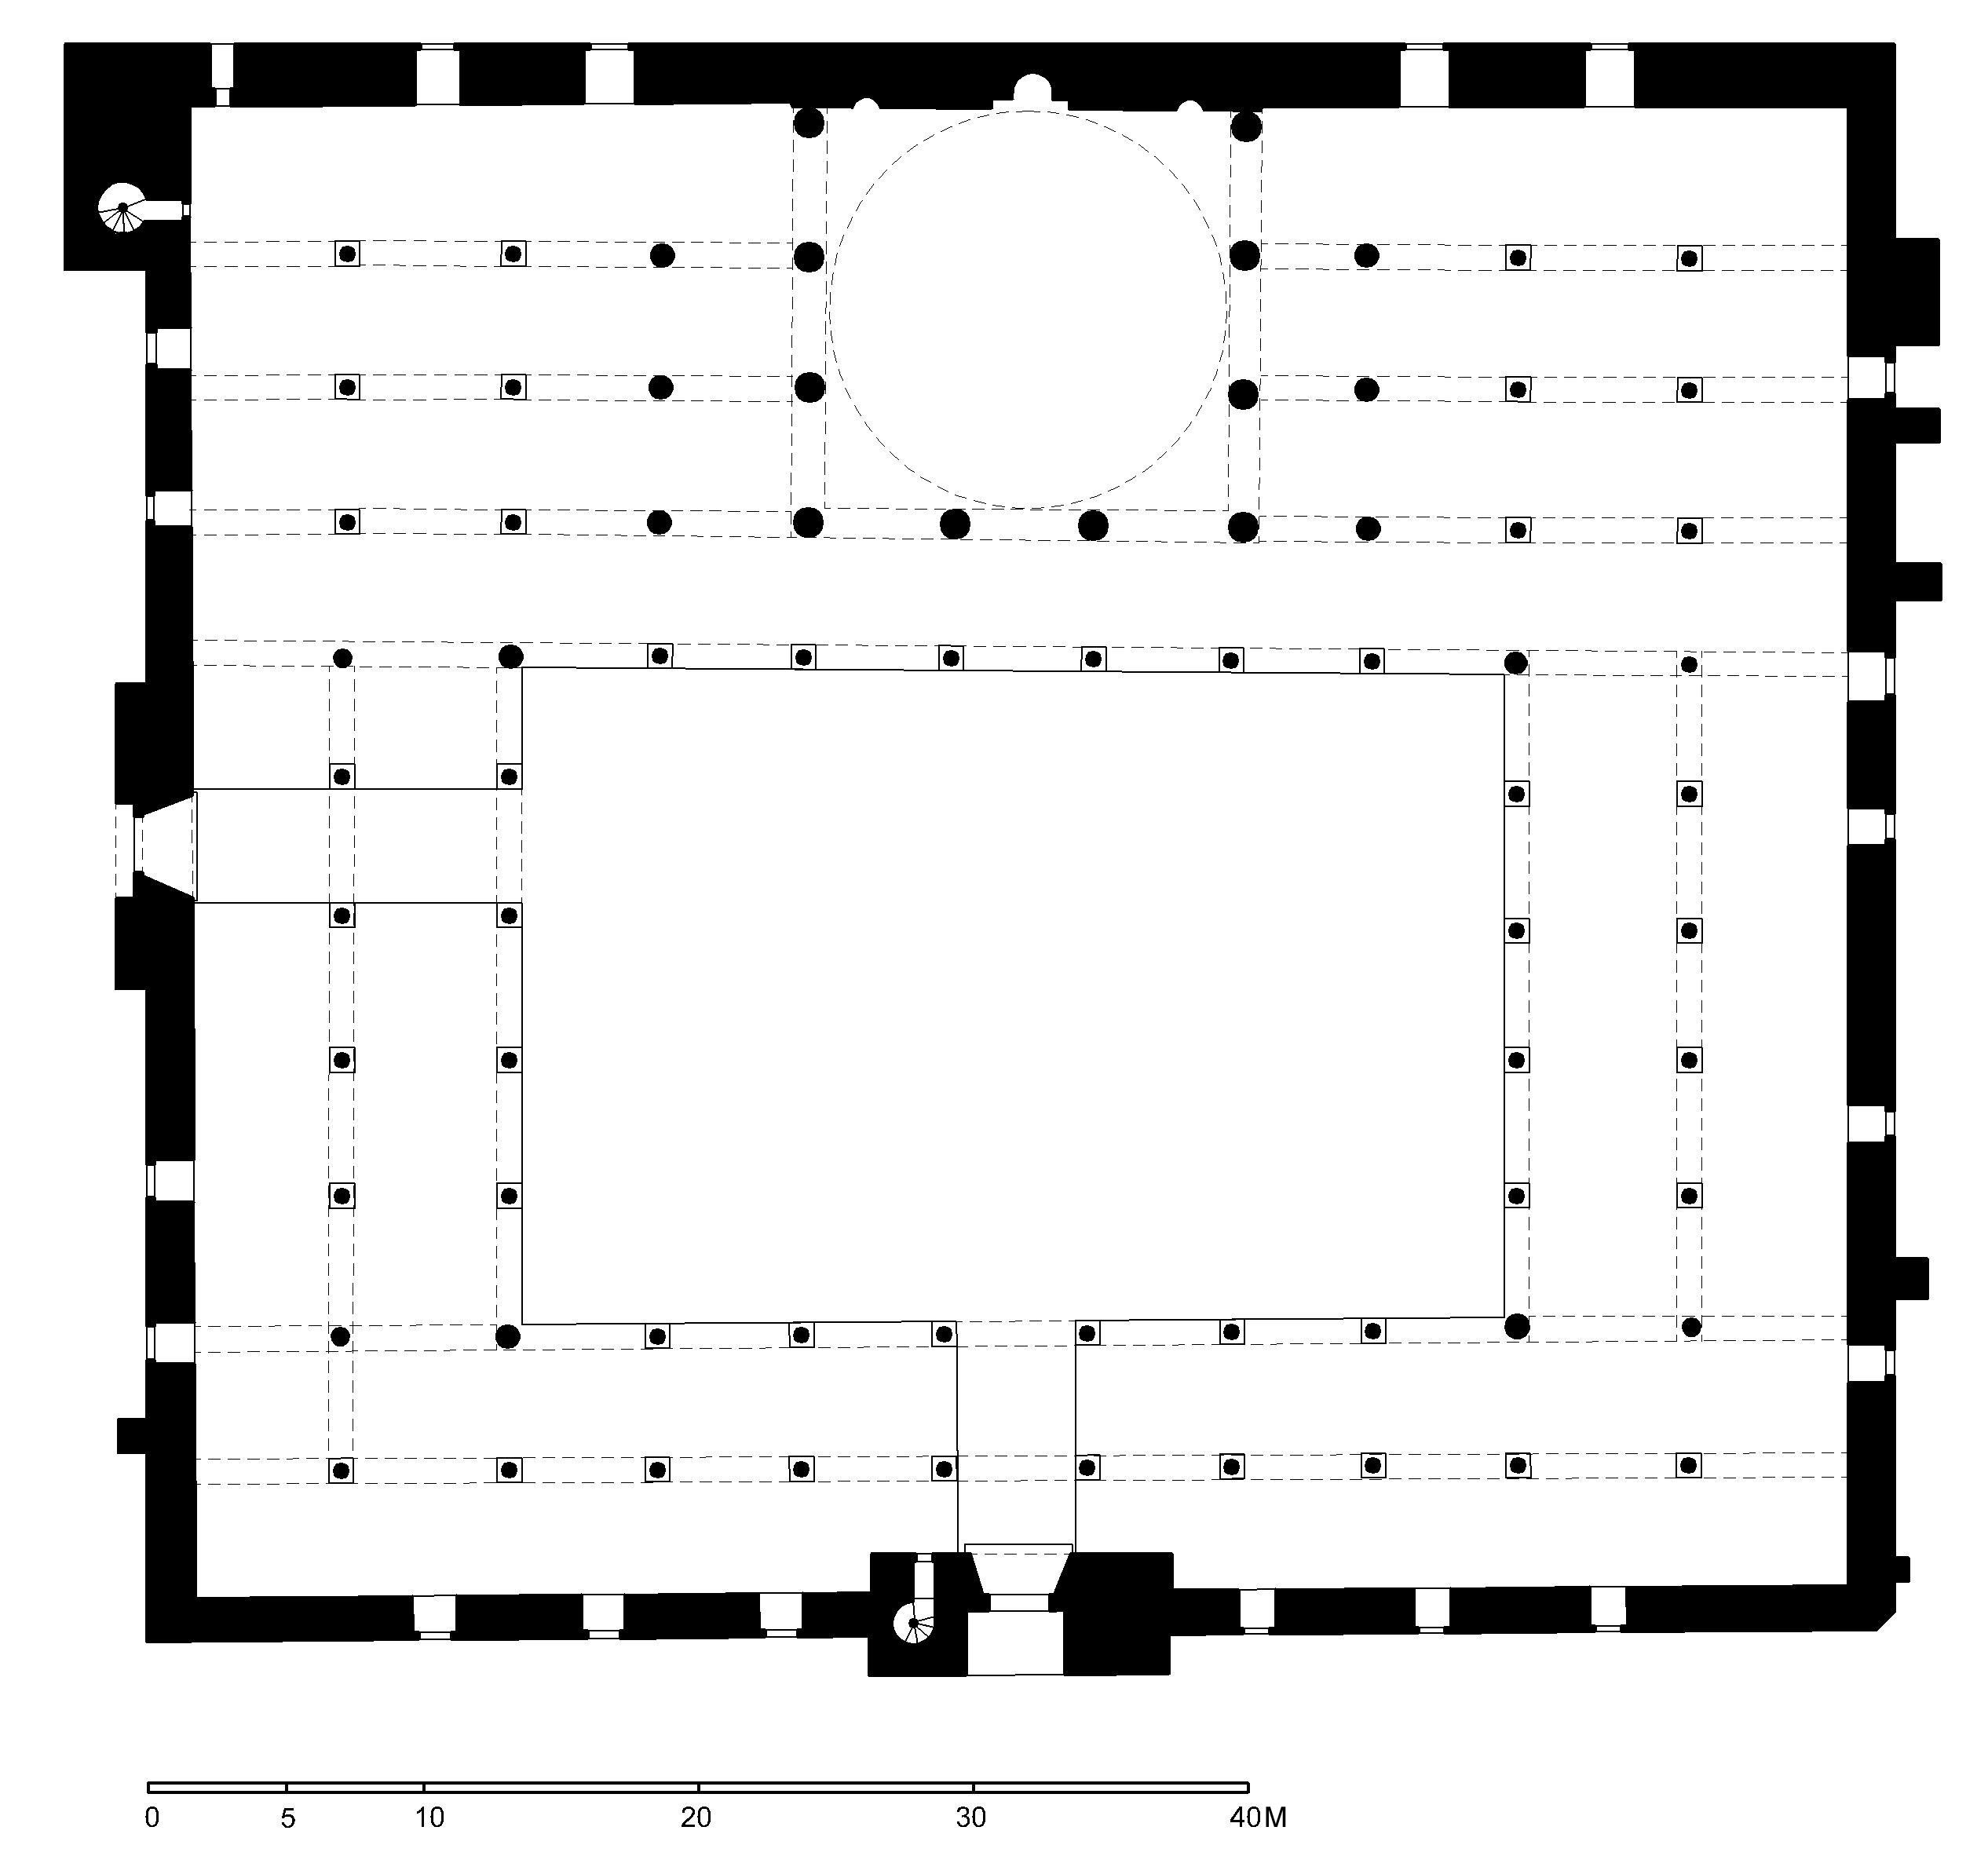 Masjid al-Sultan al-Nasir Muhammad ibn Qalawun - Floor plan of mosque (after Meinecke) in AutoCAD 2000 format. Click the download button to download a zipped file containing the .dwg file.